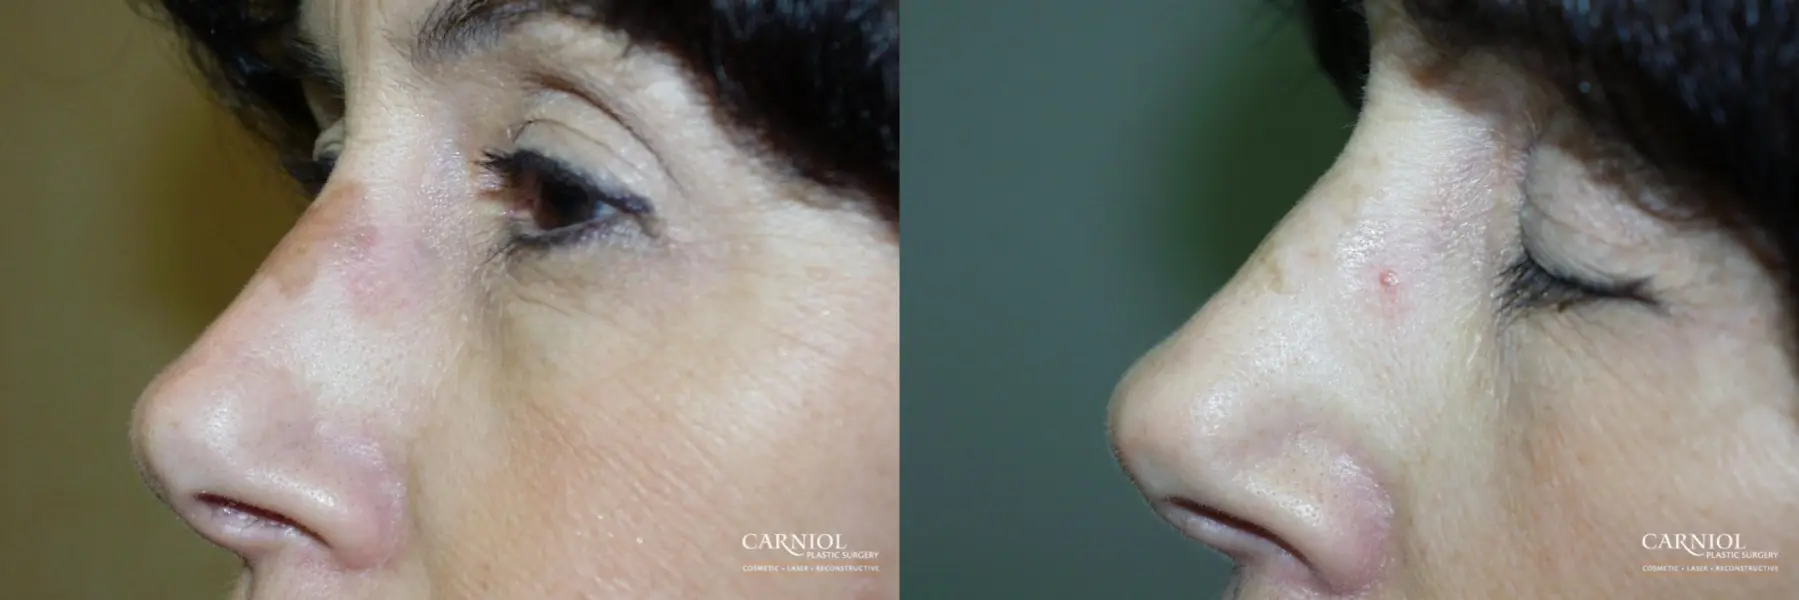 Laser Skin Resurfacing - Face: Patient 1 - Before and After  